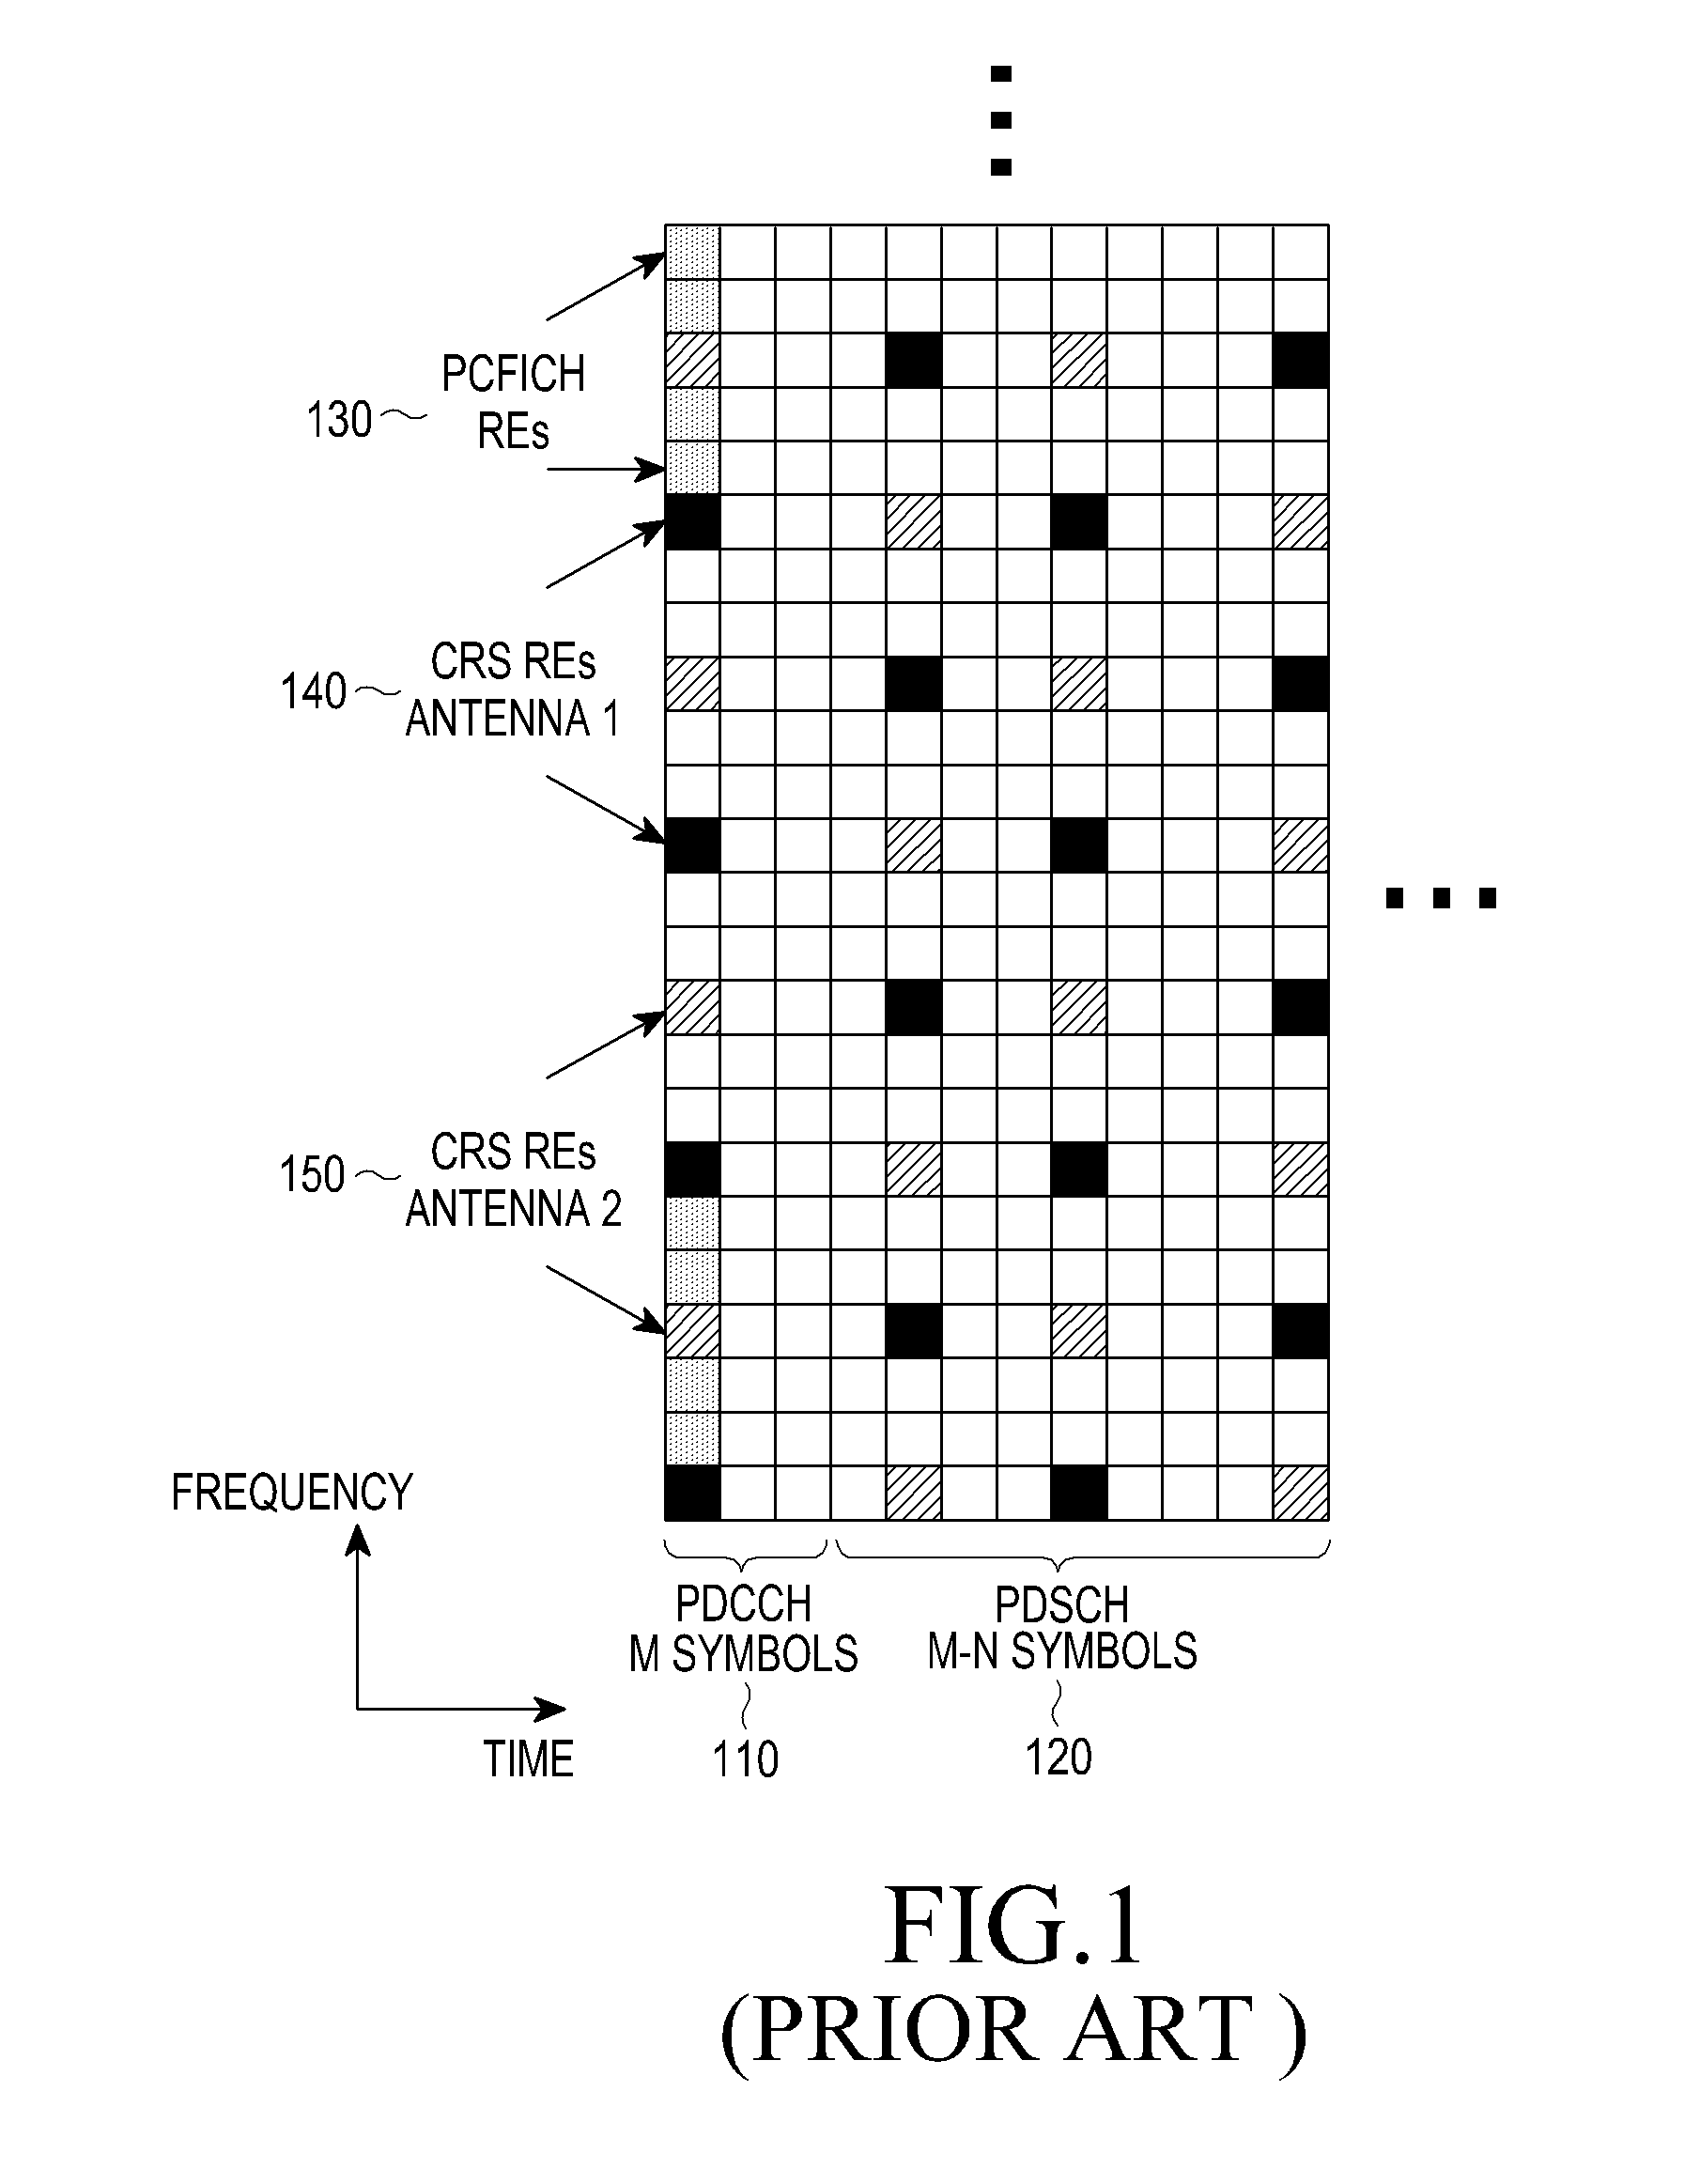 Extension of physical downlink control signaling in a communication system